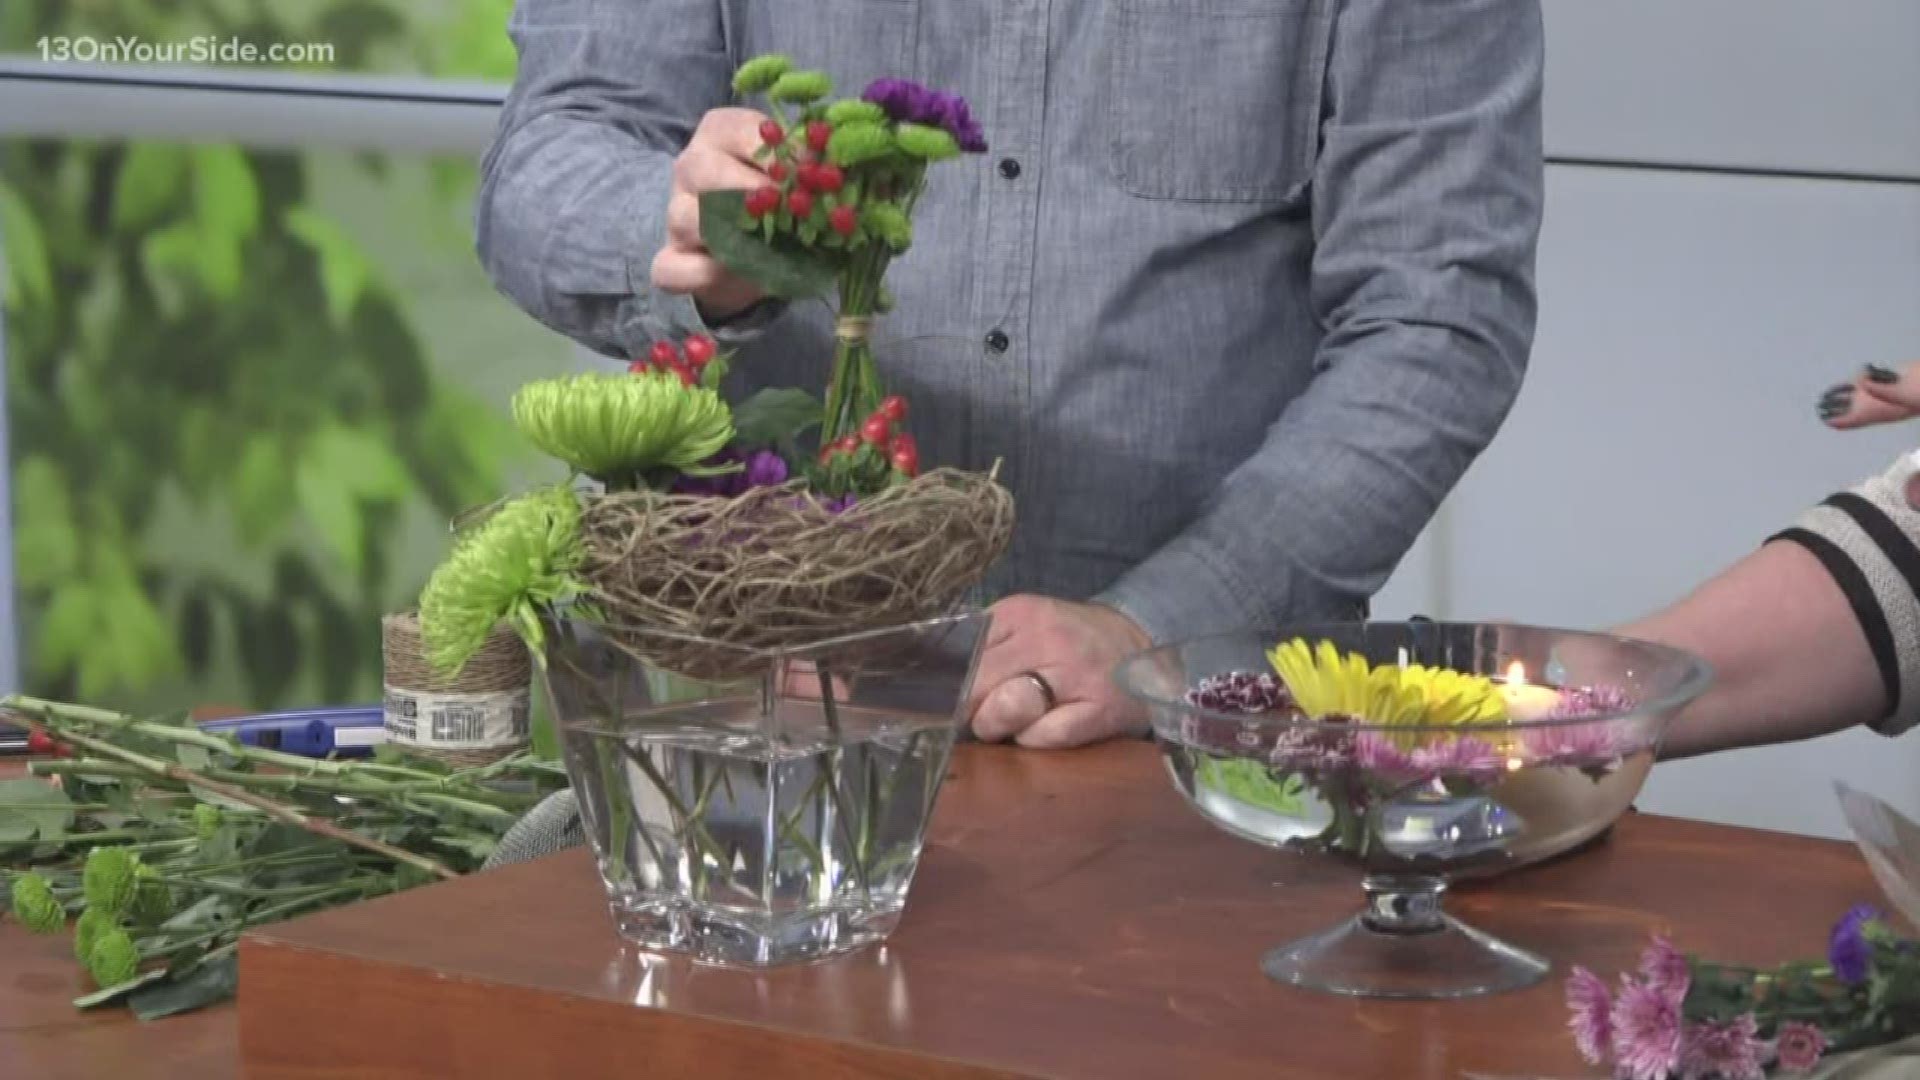 J Schwanke from ubloom.com shows us some easy ways to create a lovely arrangement.